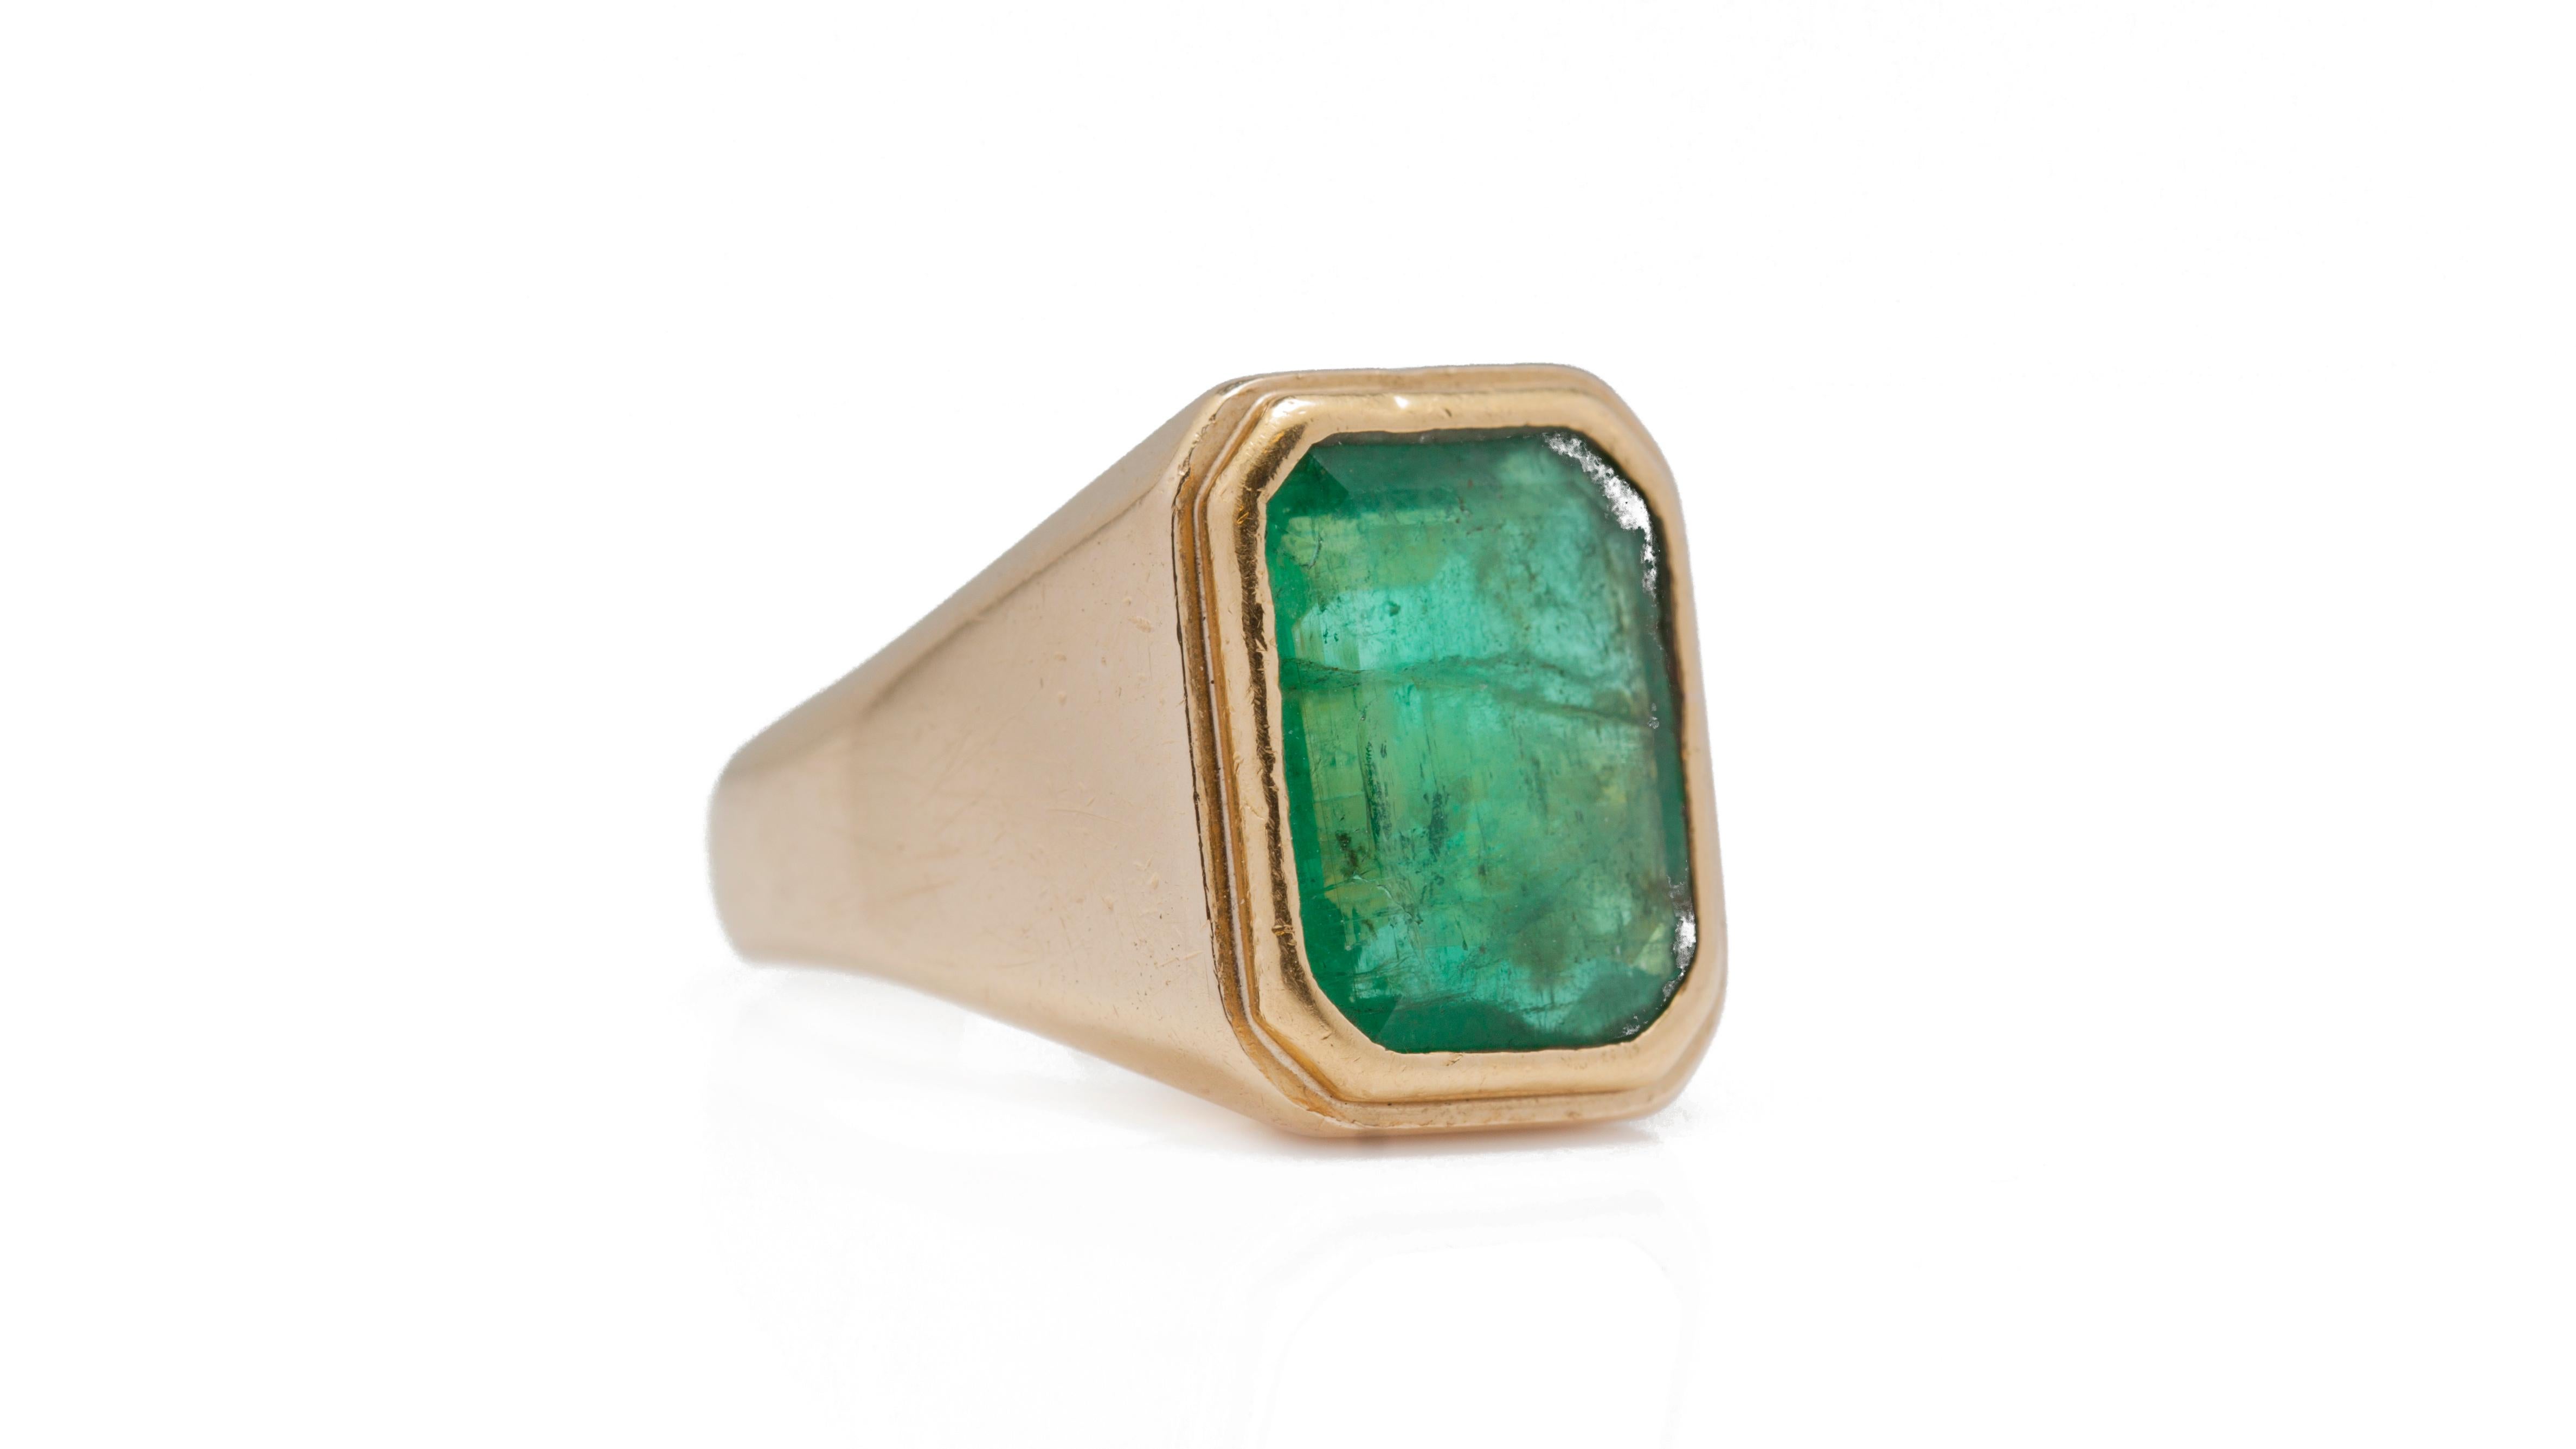 18kt yellow gold men's emerald ring
Hallmarked 18KT
Circa 1950-1970's

Dimensions -
Weight : 17 grams
Finger Size (UK) = K (US) = 5 1/2 (EU) = 50 1/4
Size : 2.8 x 1.9 x 1.8 cm

Emerald - 
Cut: Emerald
Approximate Weight: 6 carats
Measurements: 15 x